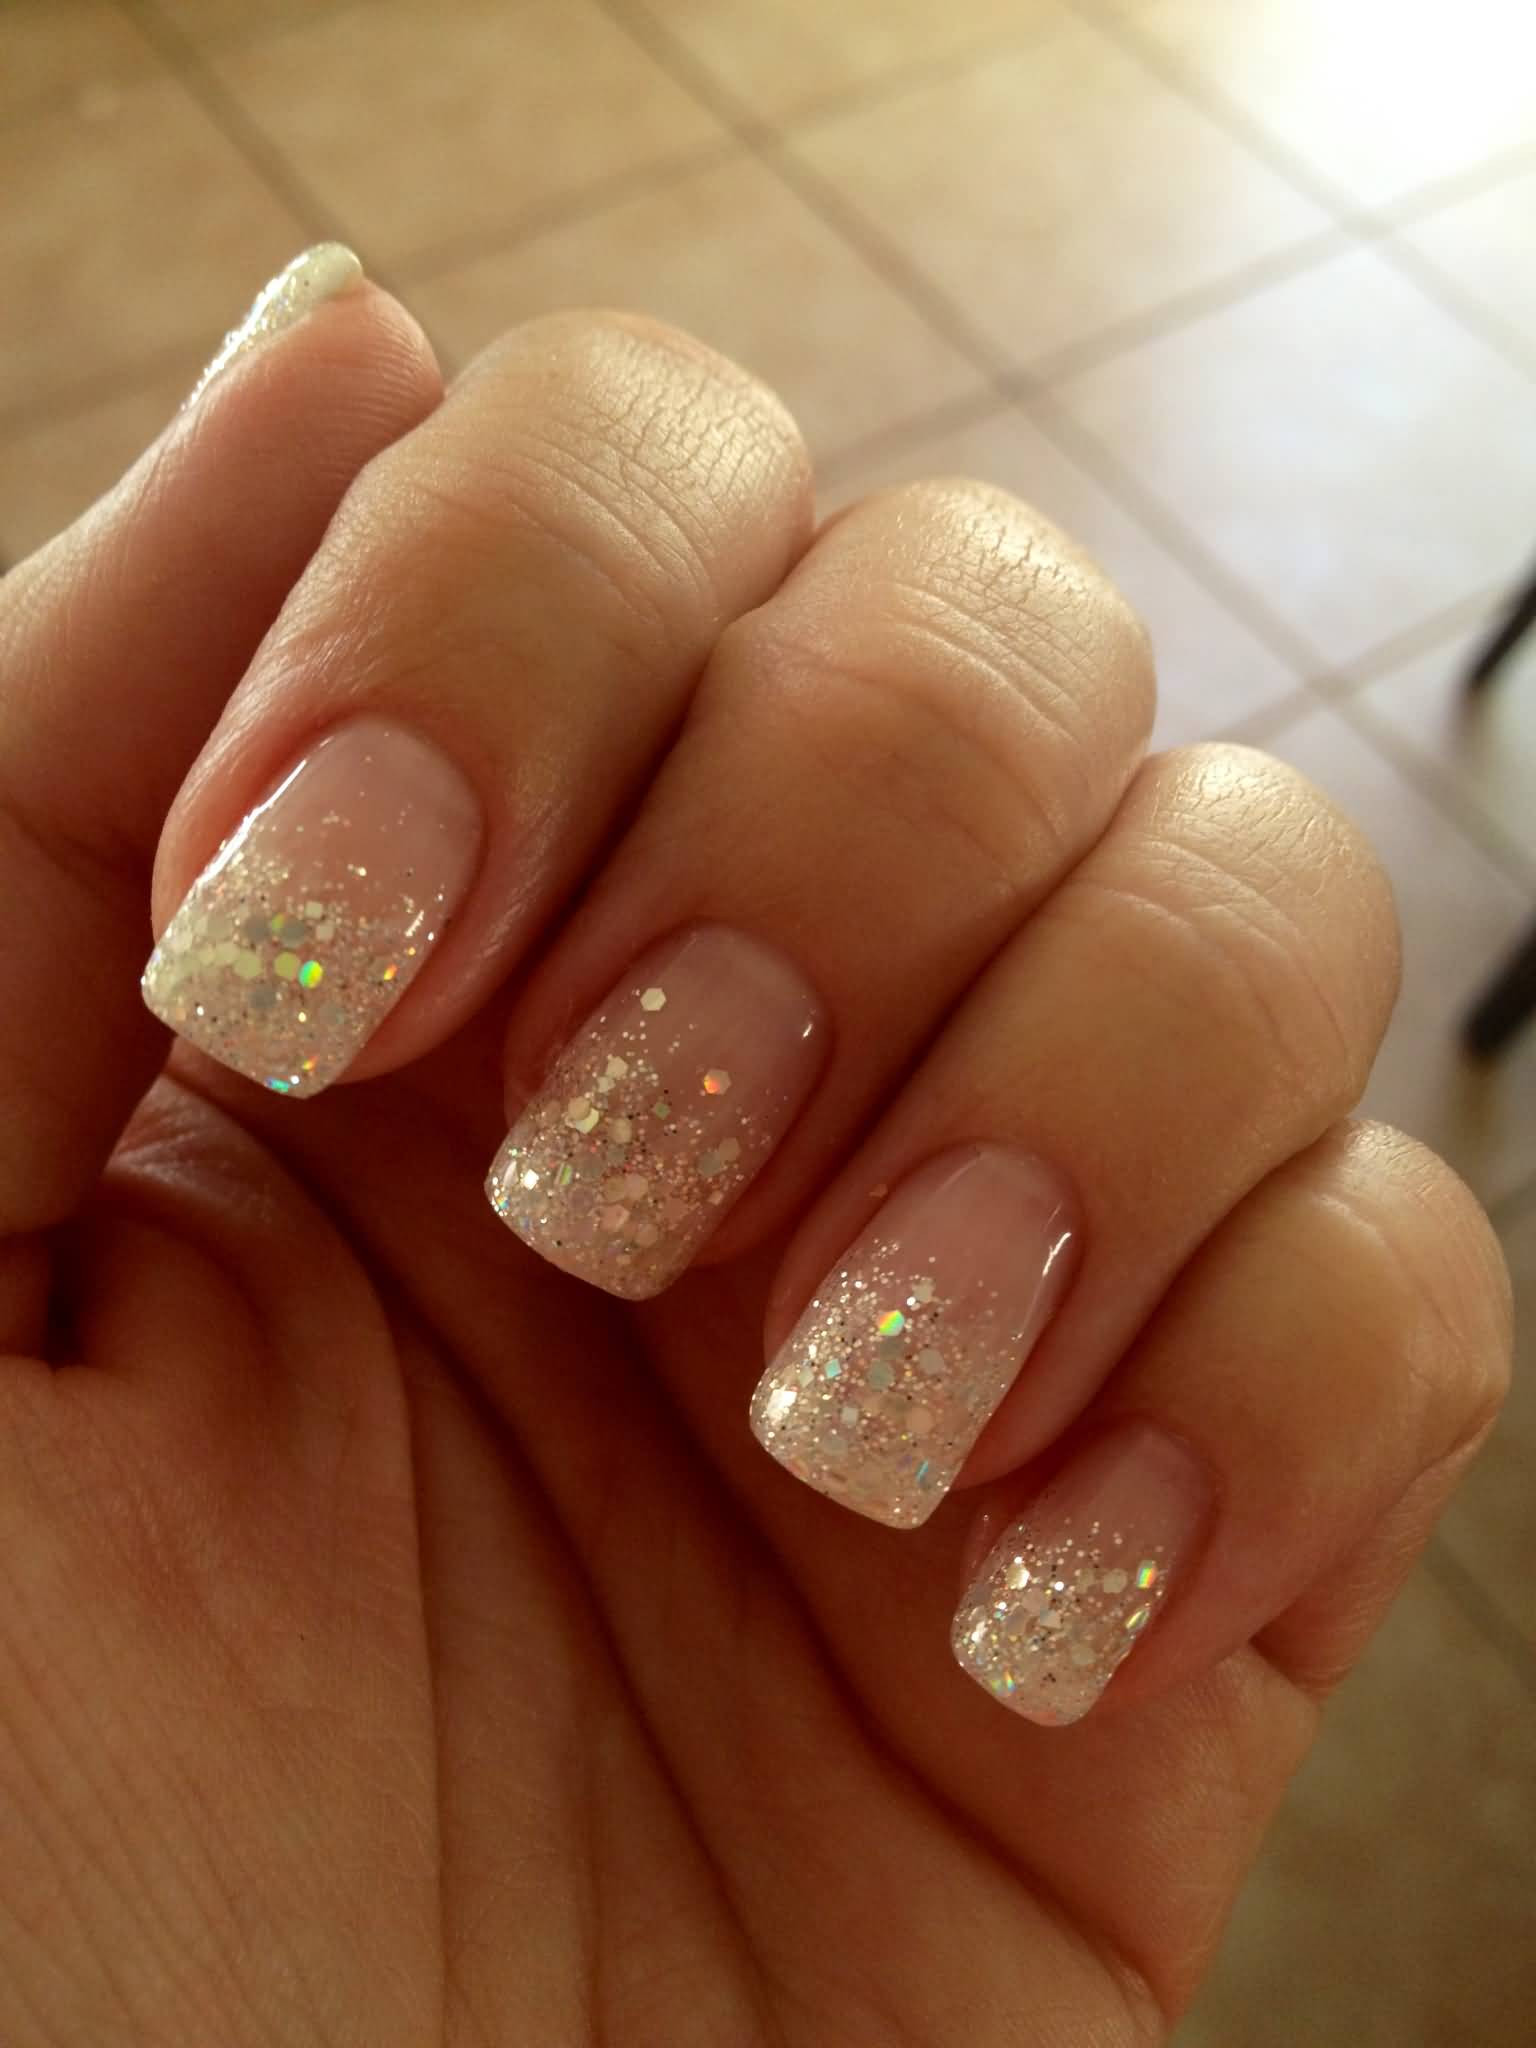 Glitter French Tip Nail Designs
 50 Most Beautiful Glitter French Tip Nail Art Design Ideas